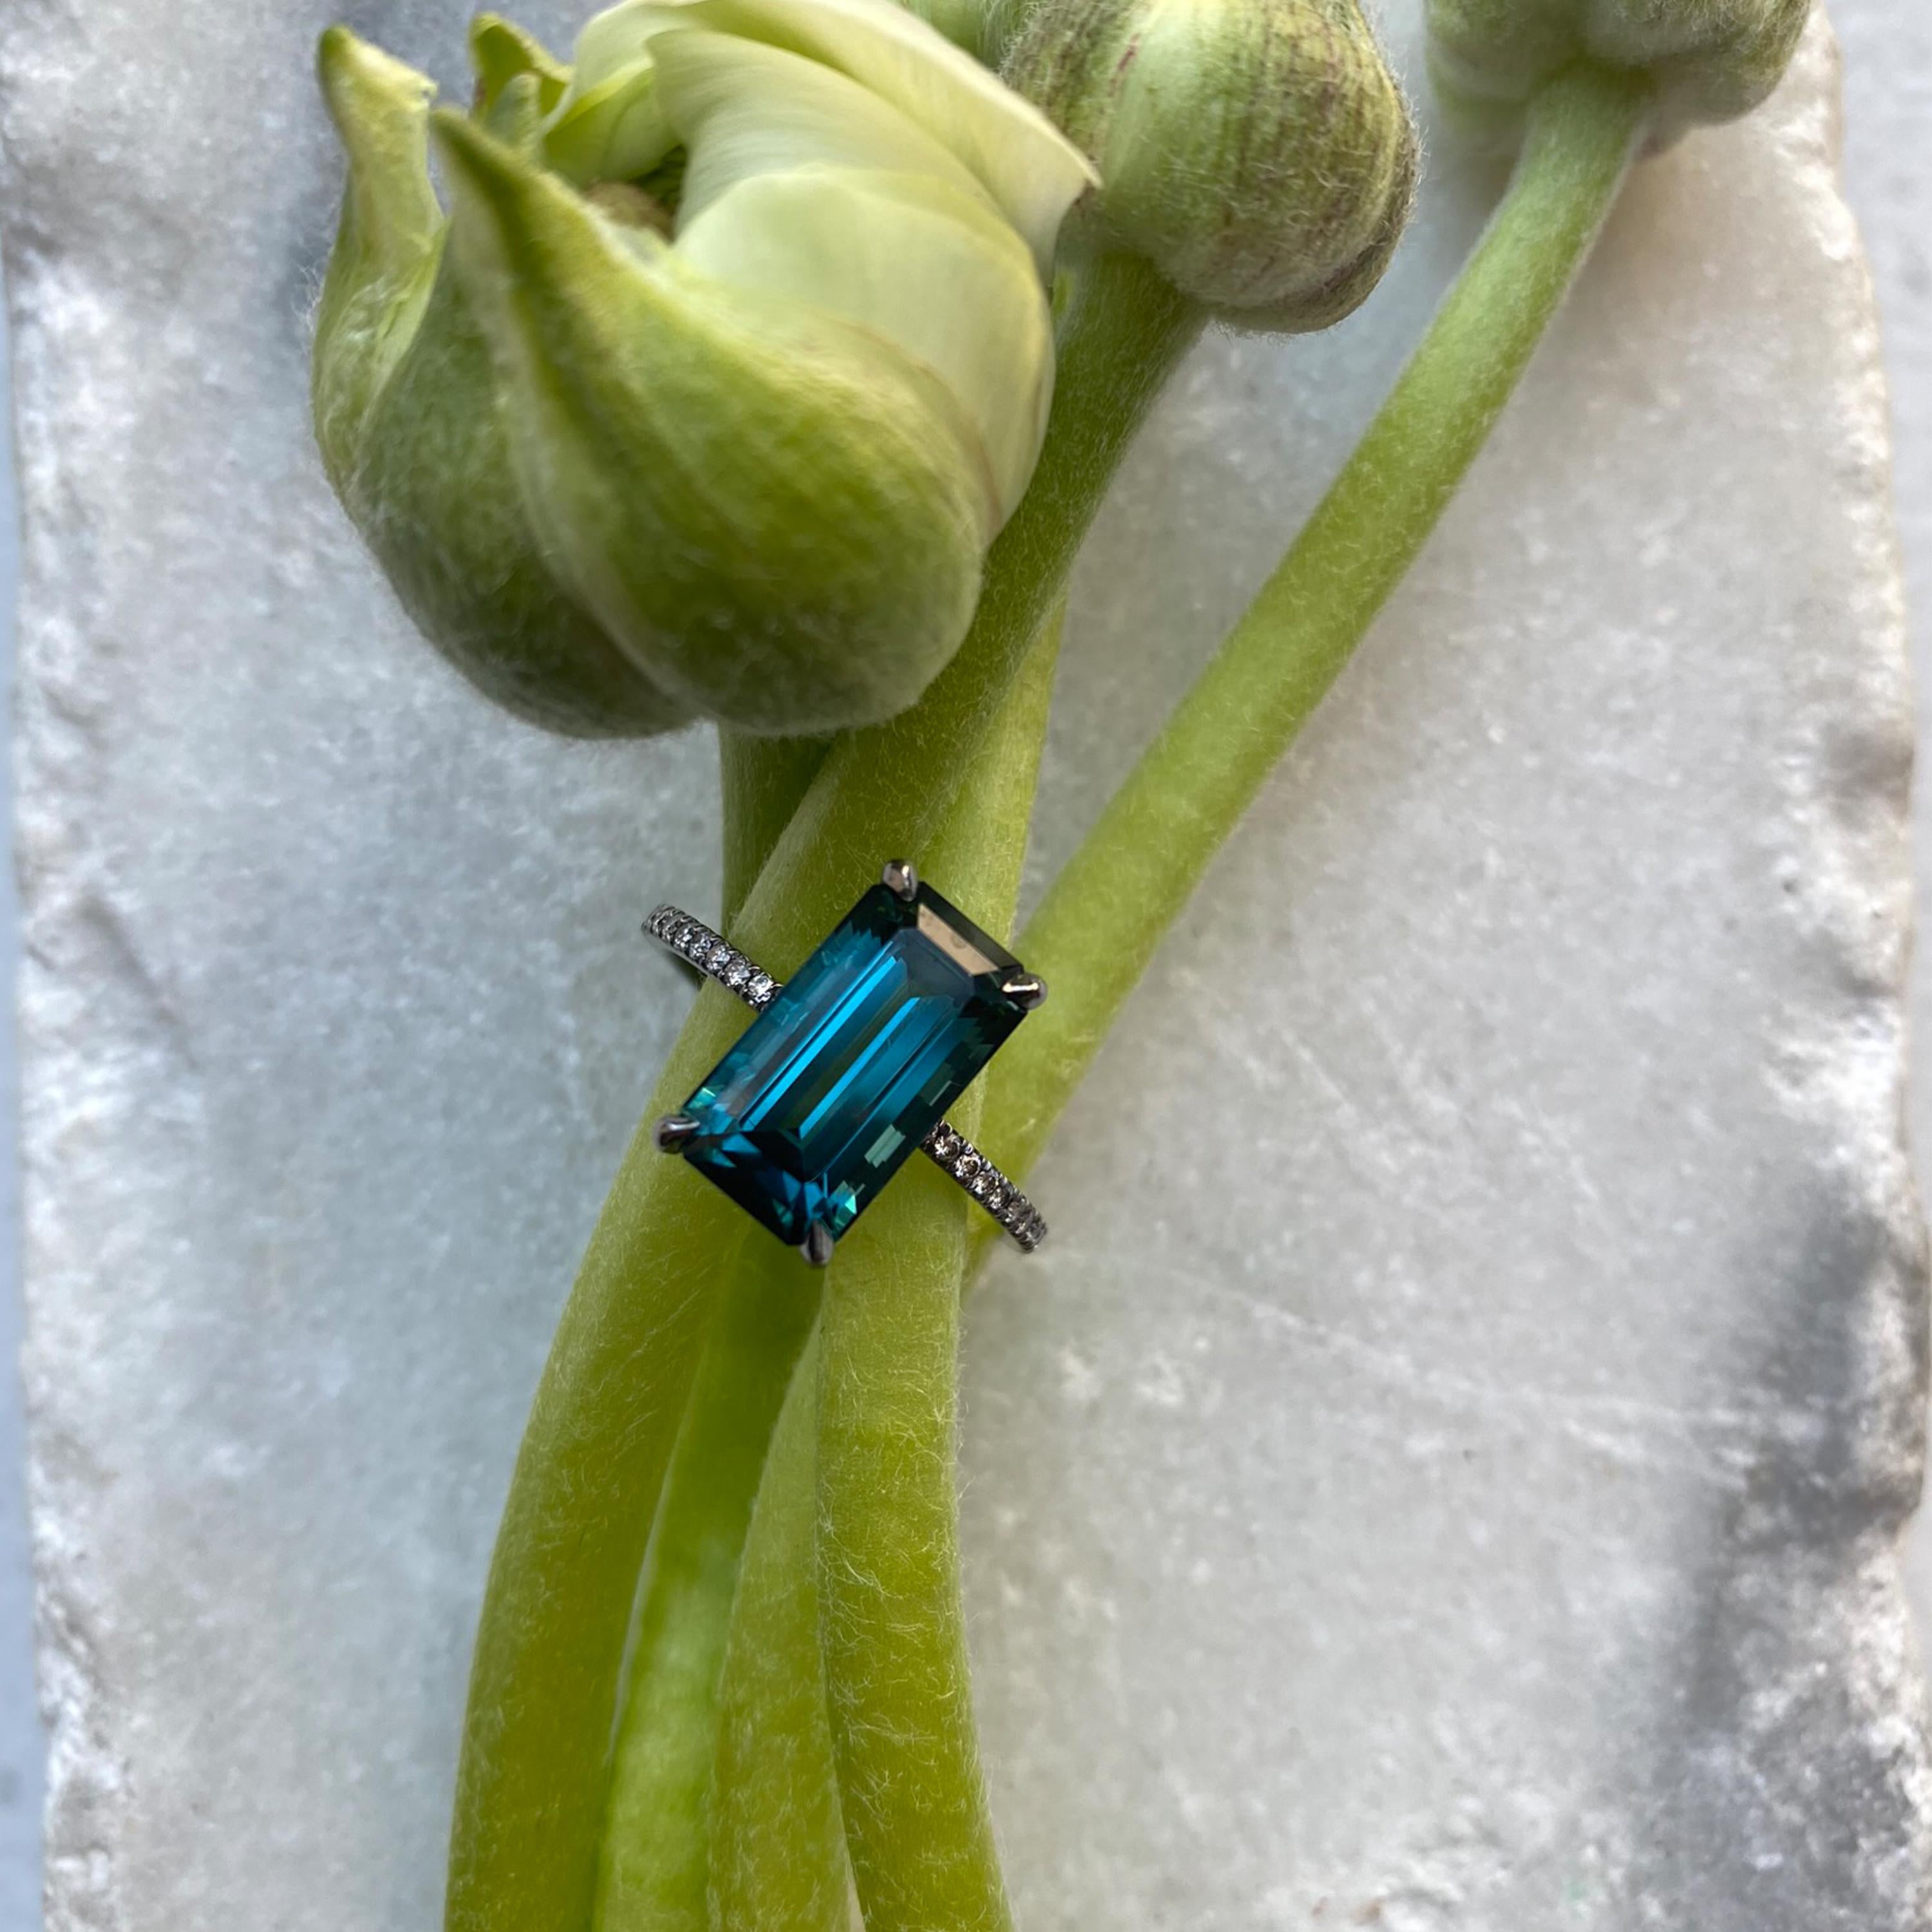 18k Blackened White Gold with 4.25 Ct Elongated Emerald Cute Afghan Indicolite and white diamond pavé - Size 7

Handmade in New York City.

Eva Fehren White, a bridal collection comprised of engagement rings and wedding bands, was launched in 2014,